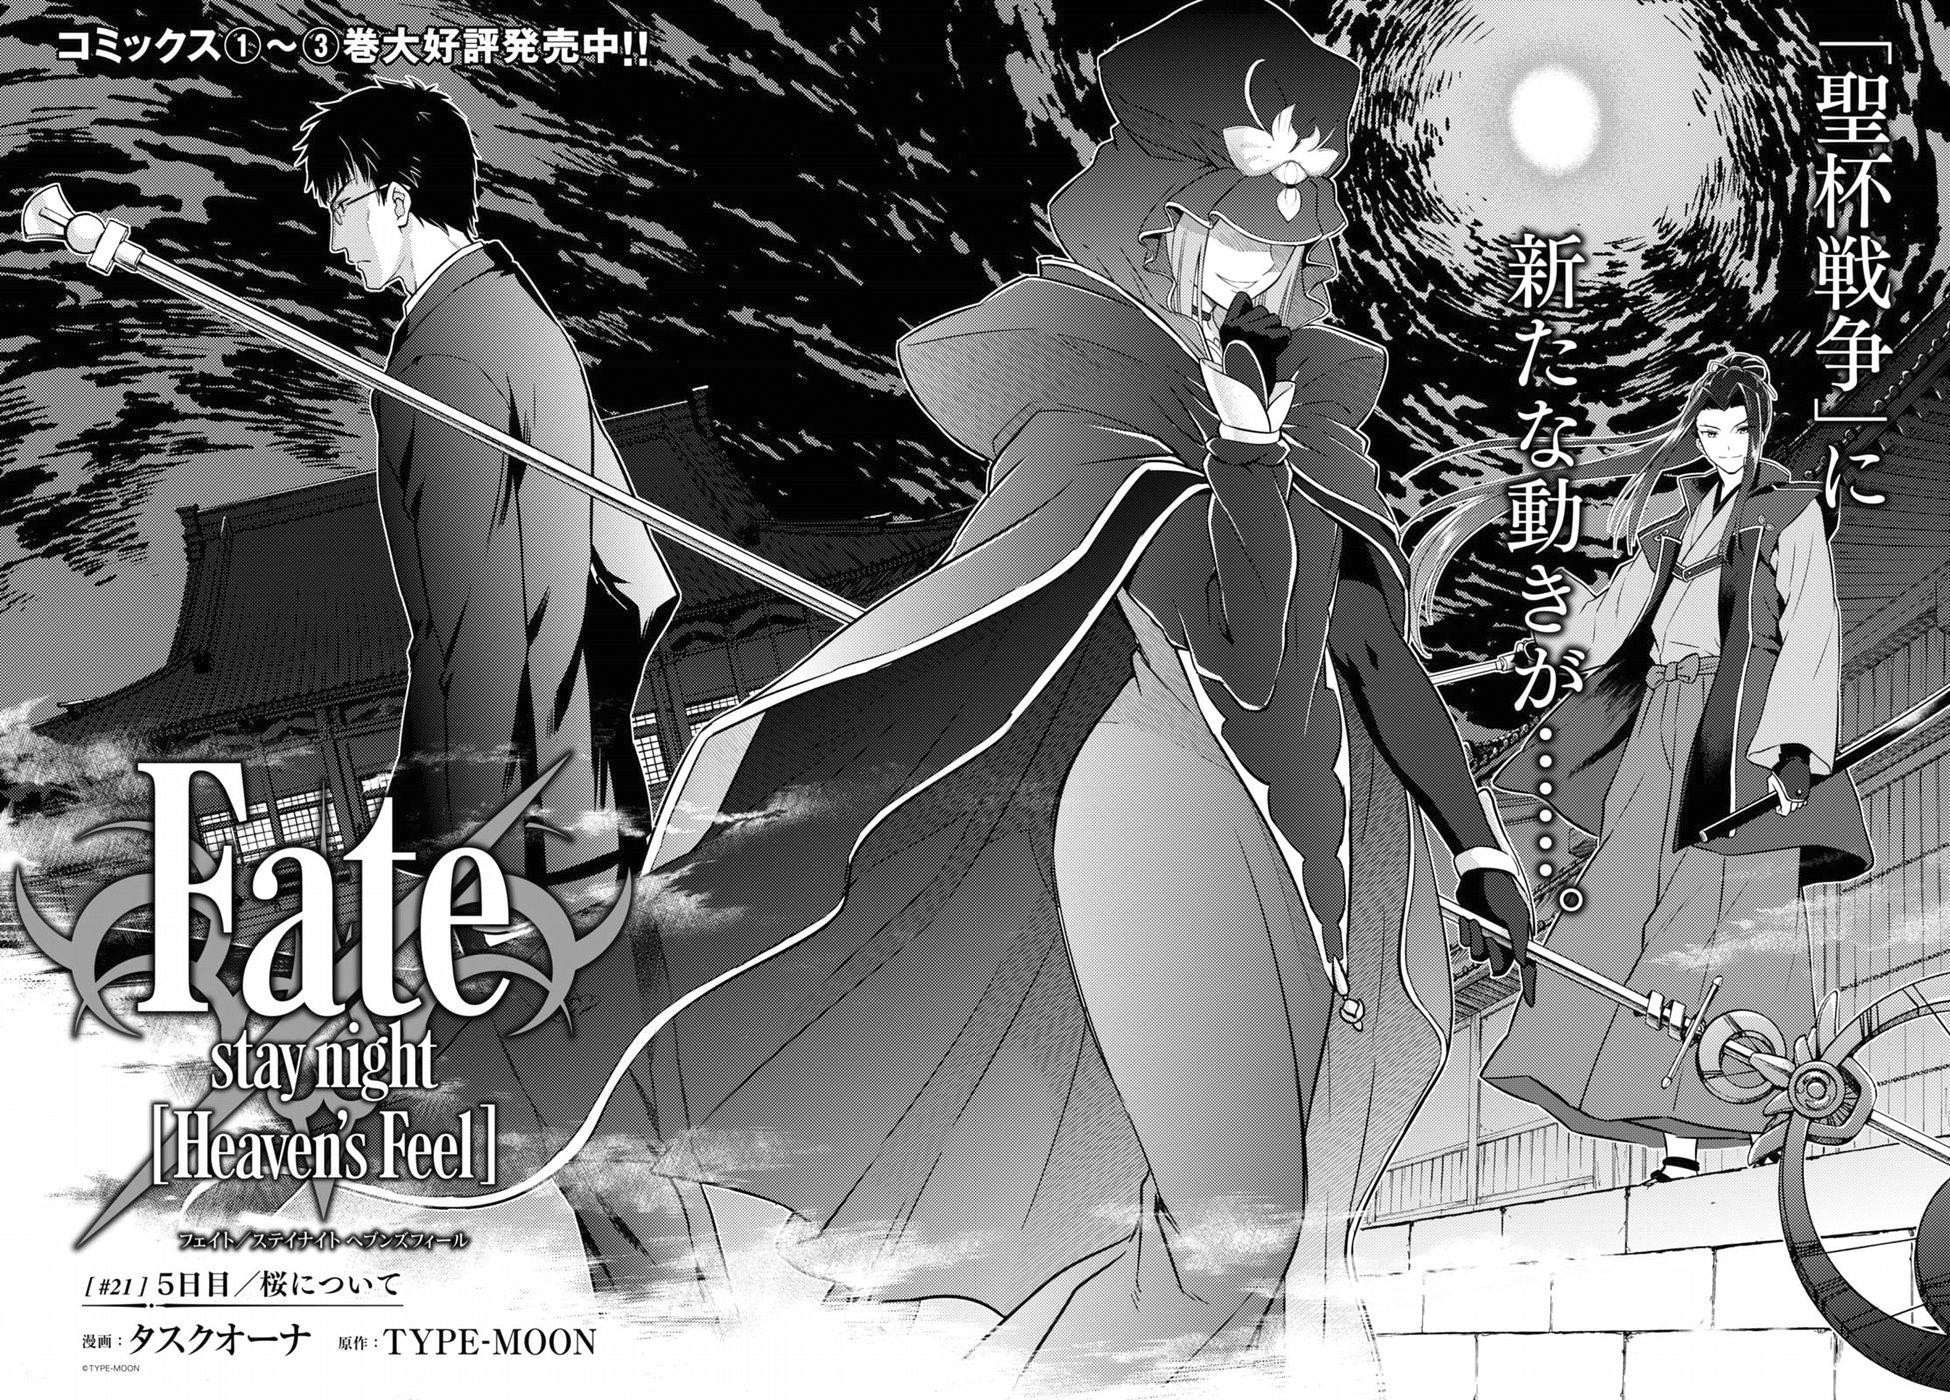 Fate/Stay night Heaven's Feel - Chapter 21 - Page 2